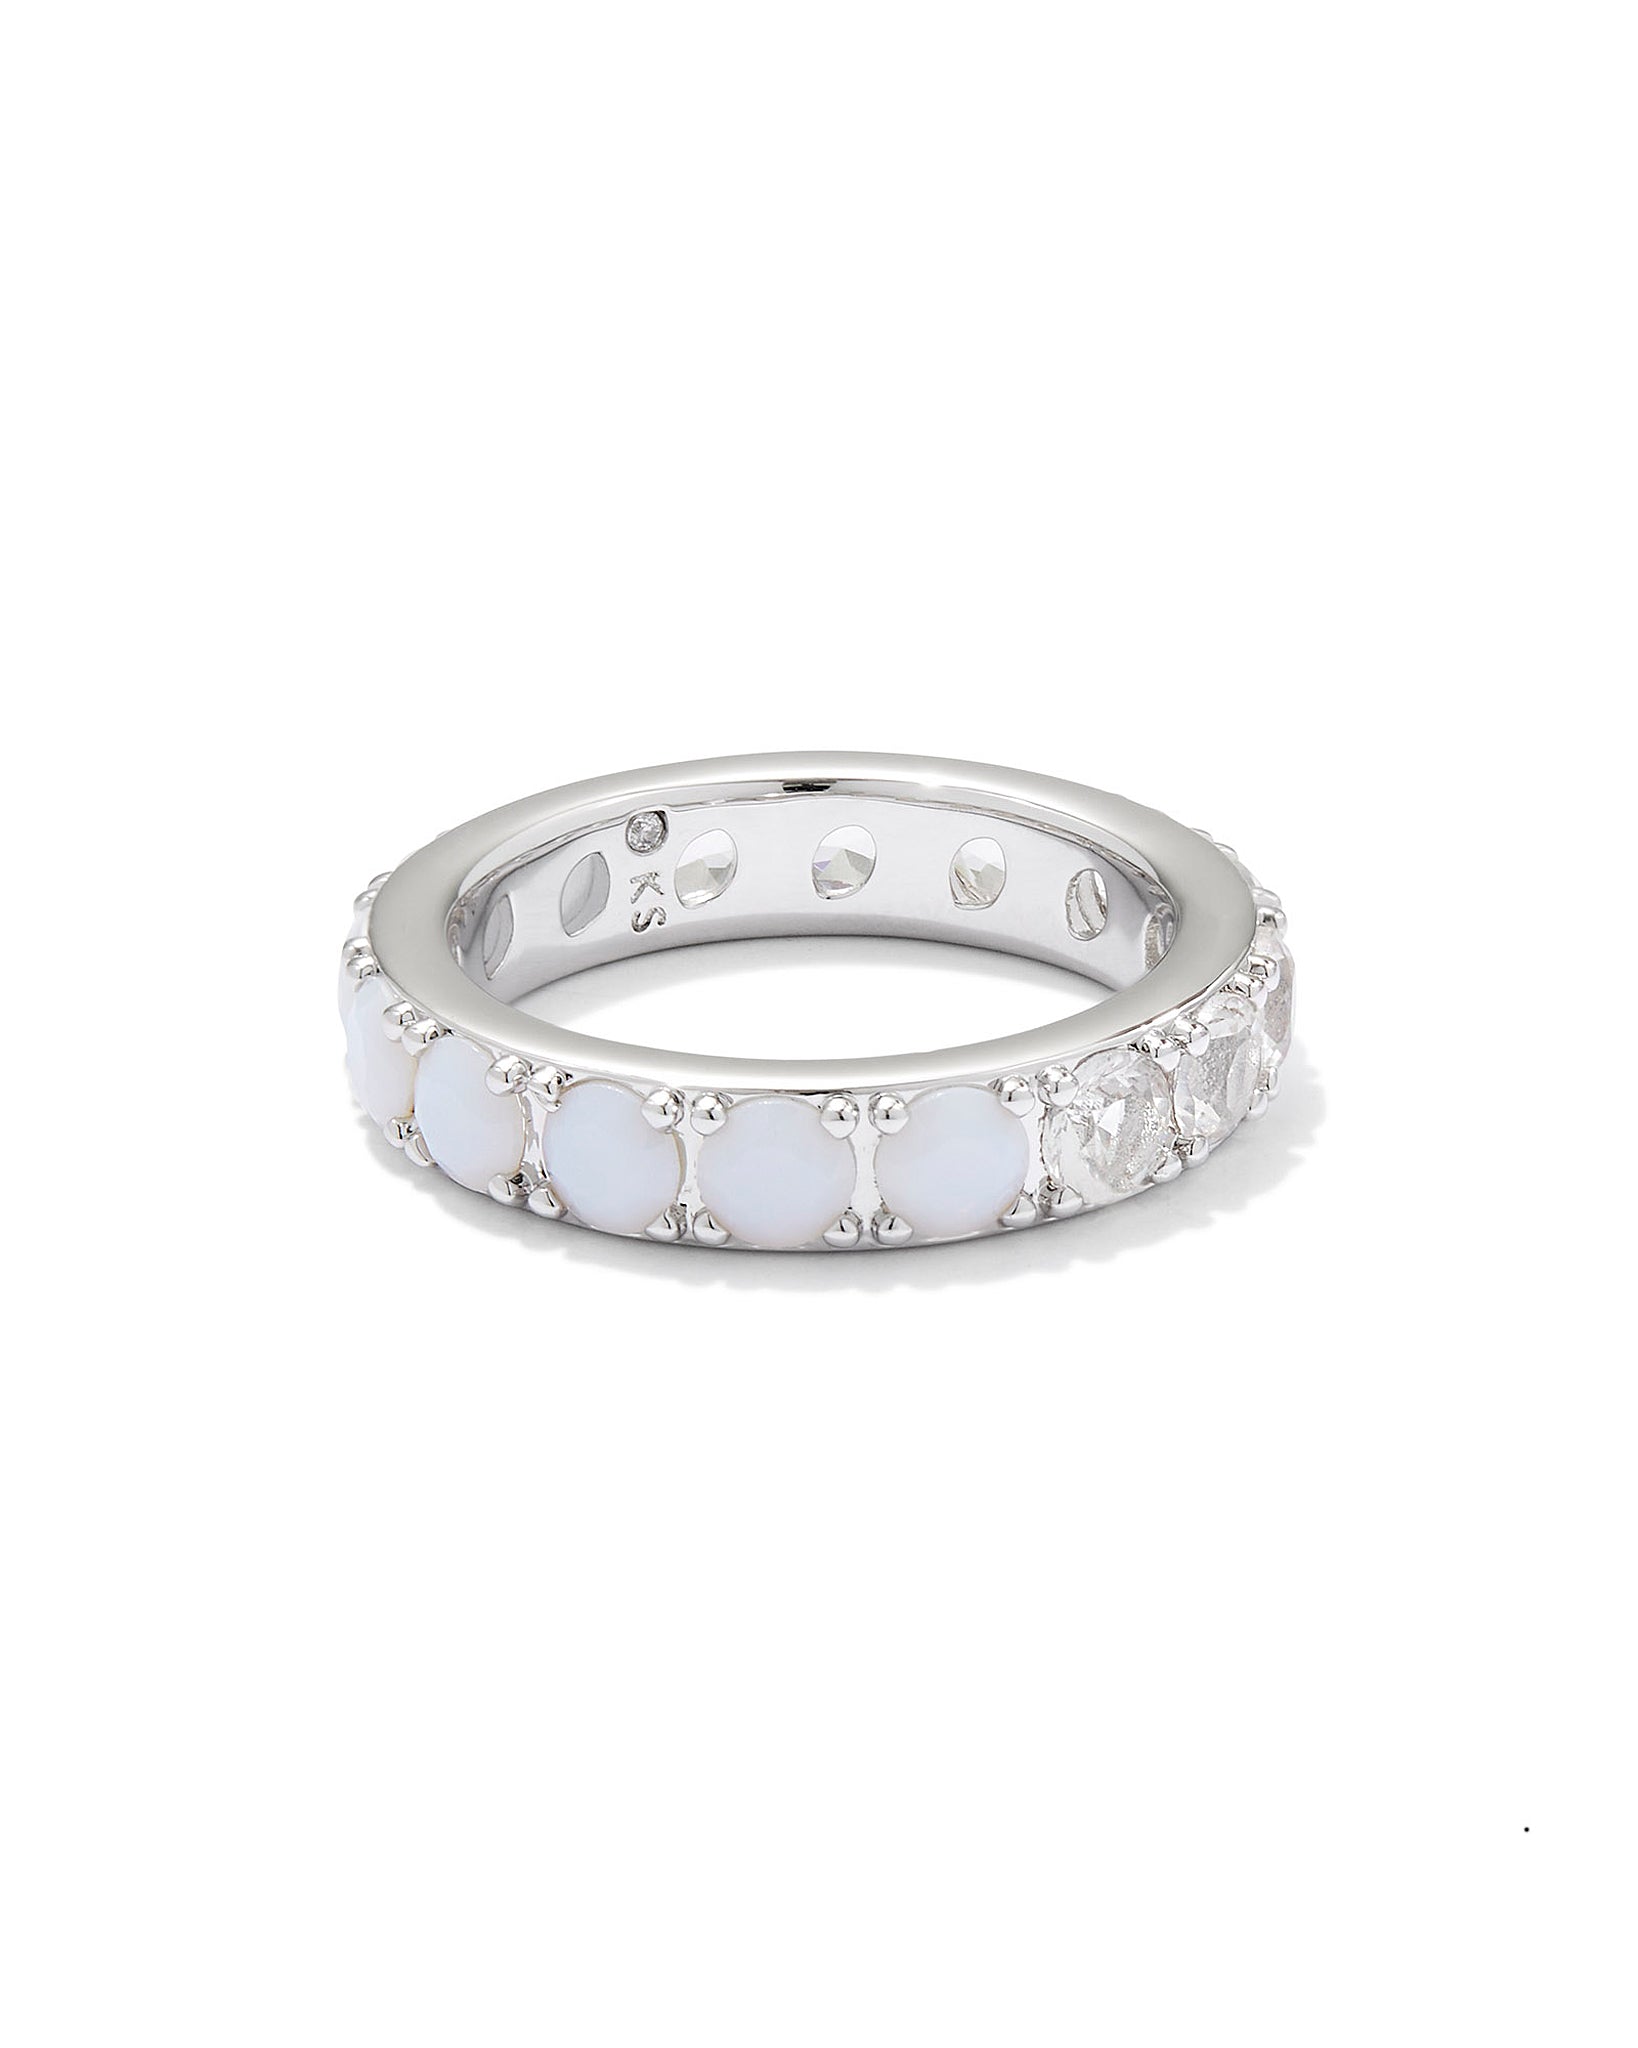 Kendra Scott Chandler Band Ring in White Opalite Mix and Rhodium Size 7